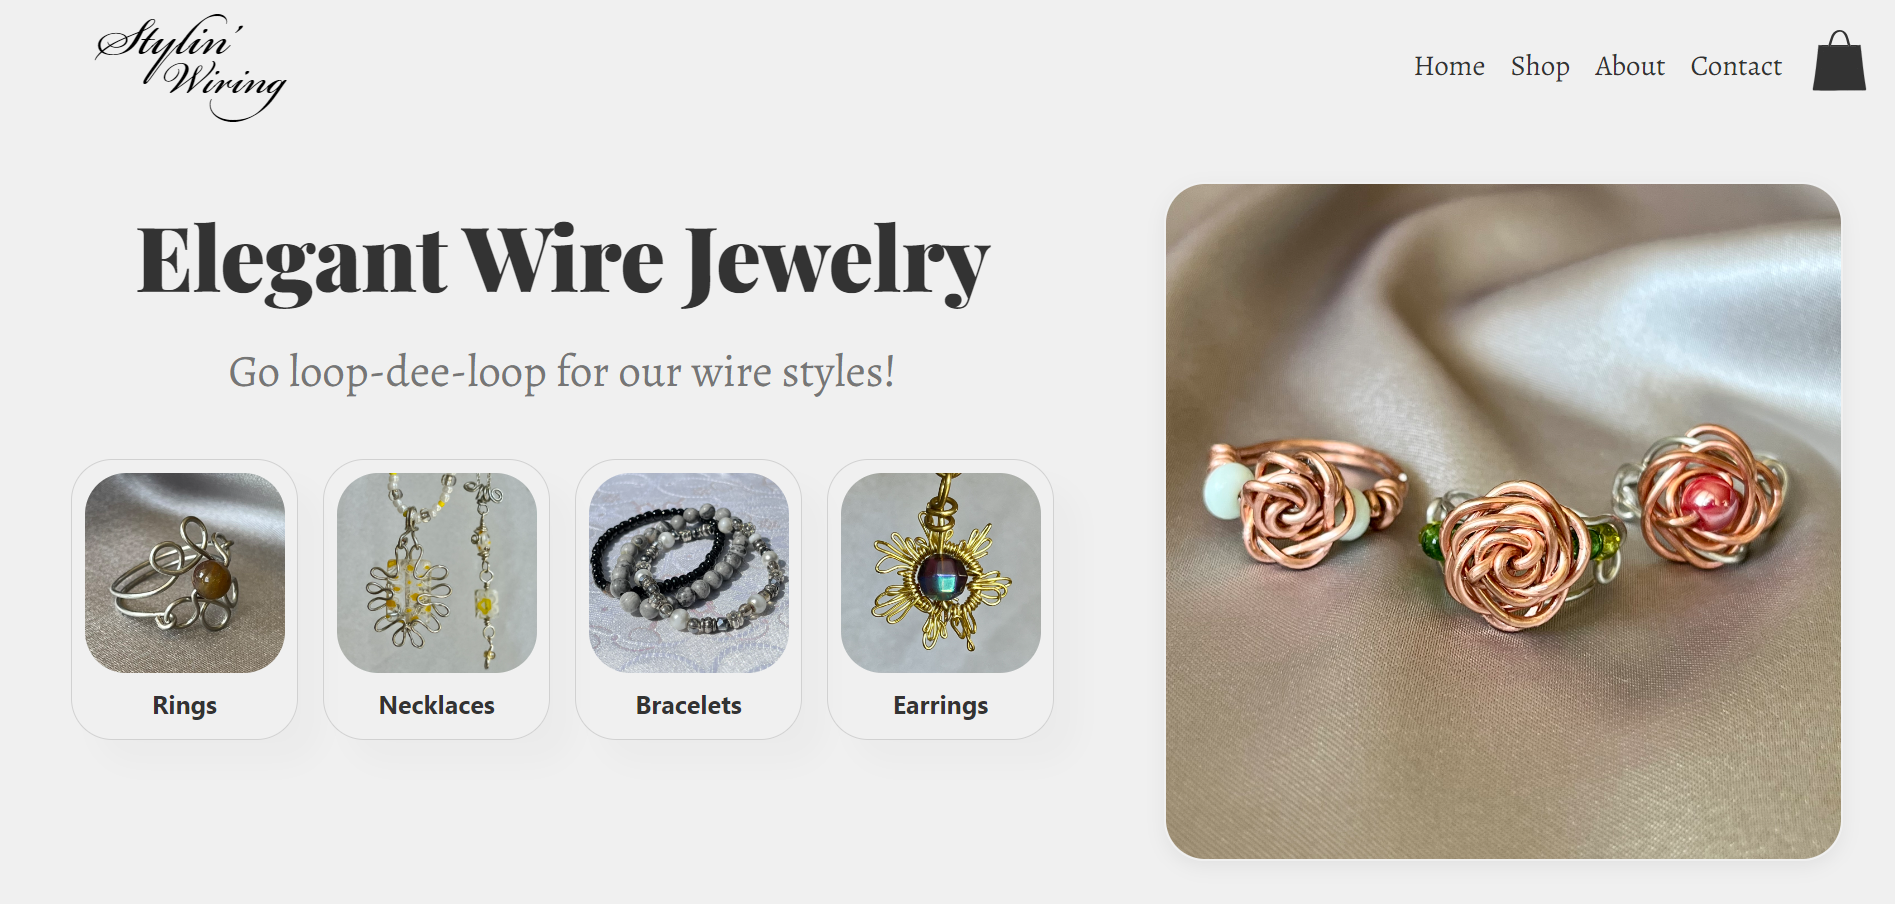 Stylin' Wiring Jewelry Website Preview